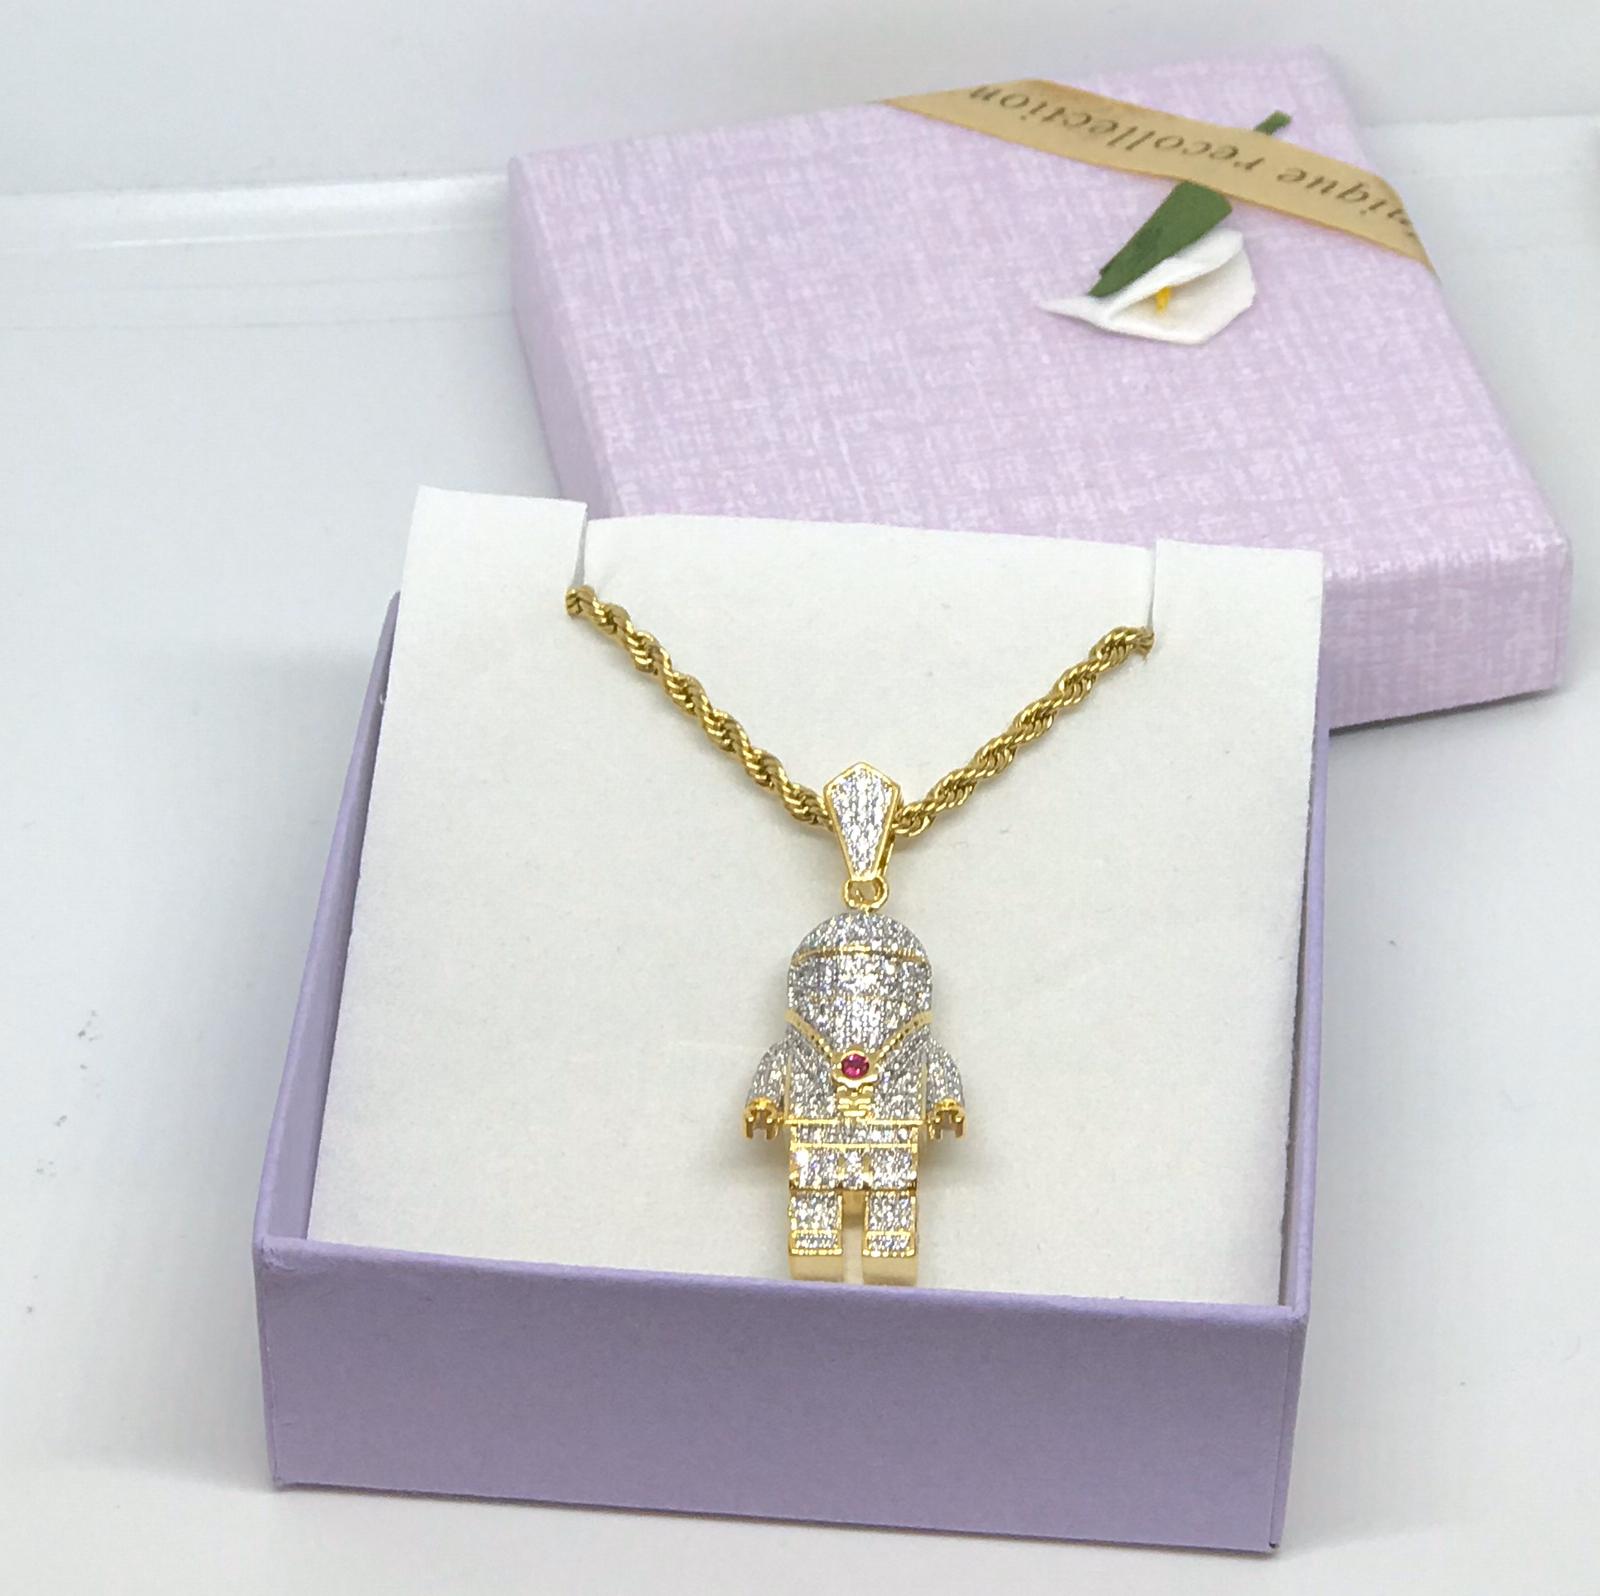 Gold Plate Lego Necklace - 7Jewelry